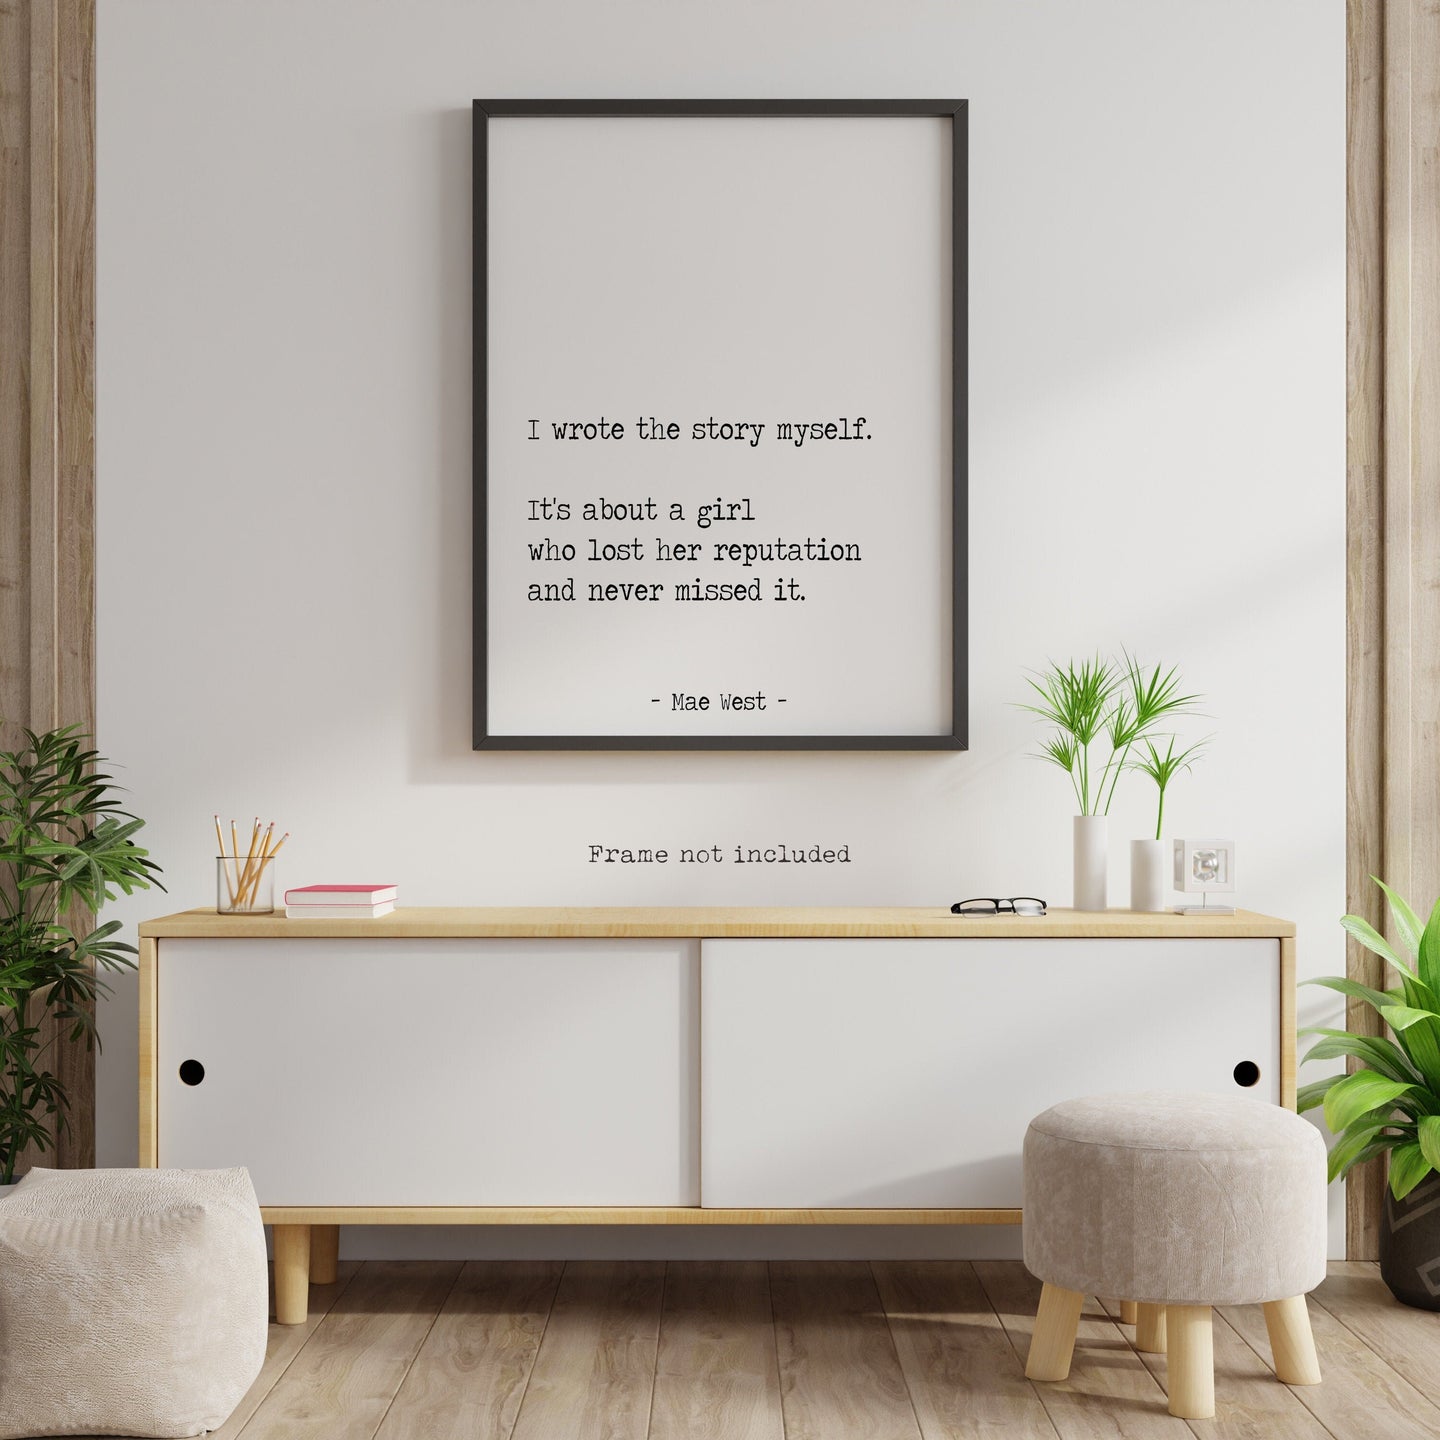 Mae West quote Print - lost her reputation and never missed it - UNFRAMED wall art print for Home feminist print Mae West Pin Up